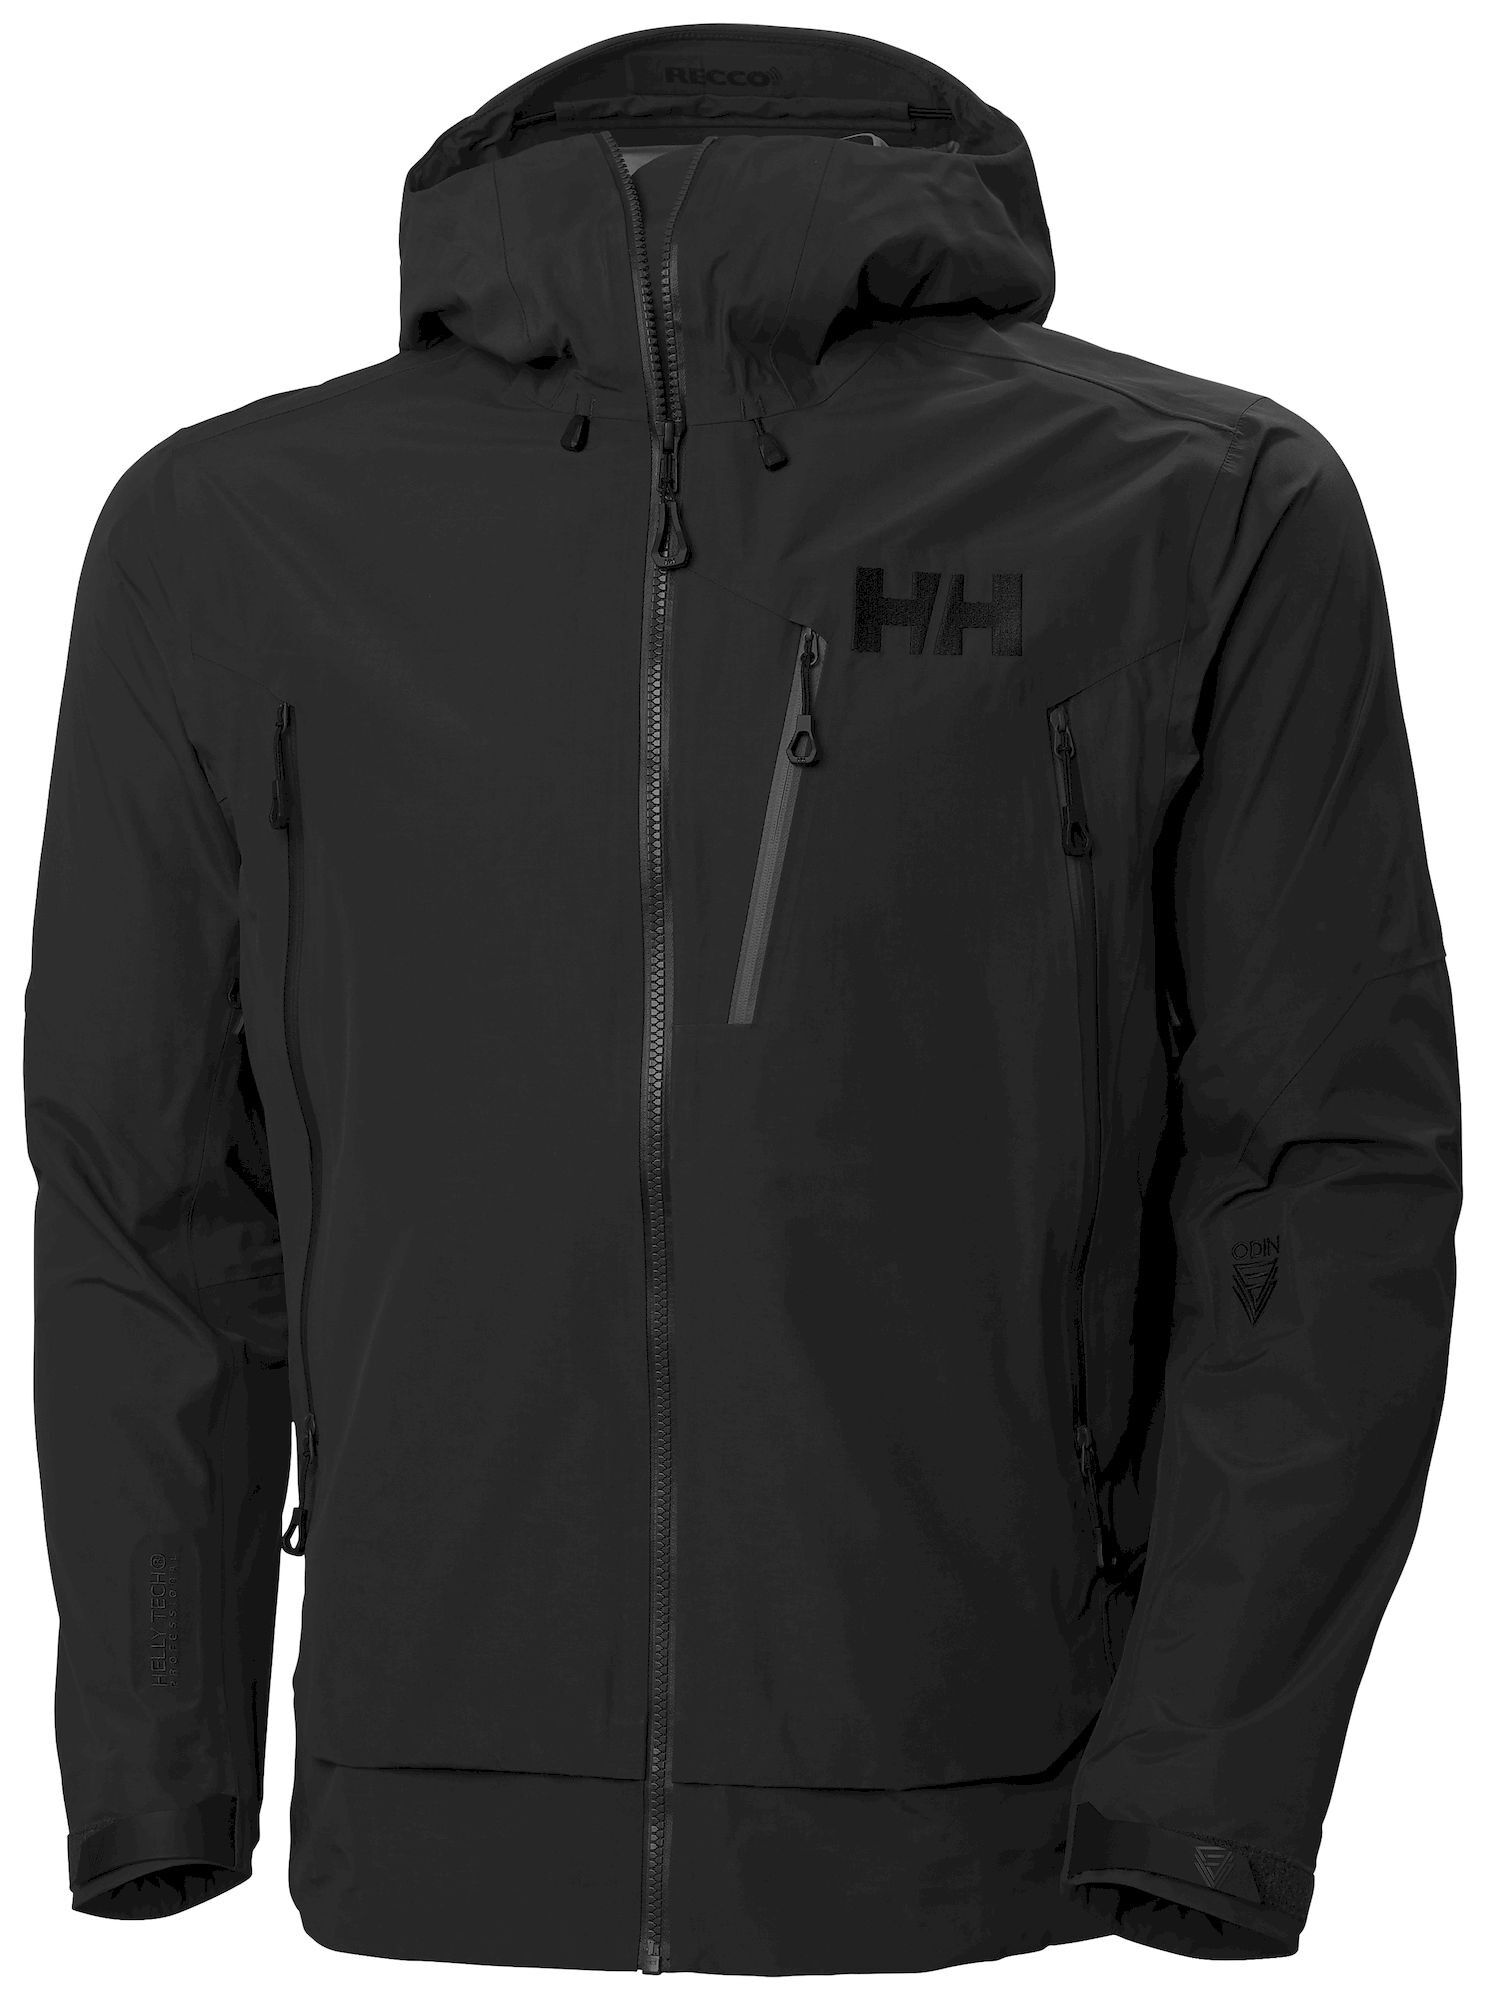 Helly Hansen Odin 9 Worlds 3.0 Jacket - Chaqueta impermeable - Hombre | Hardloop